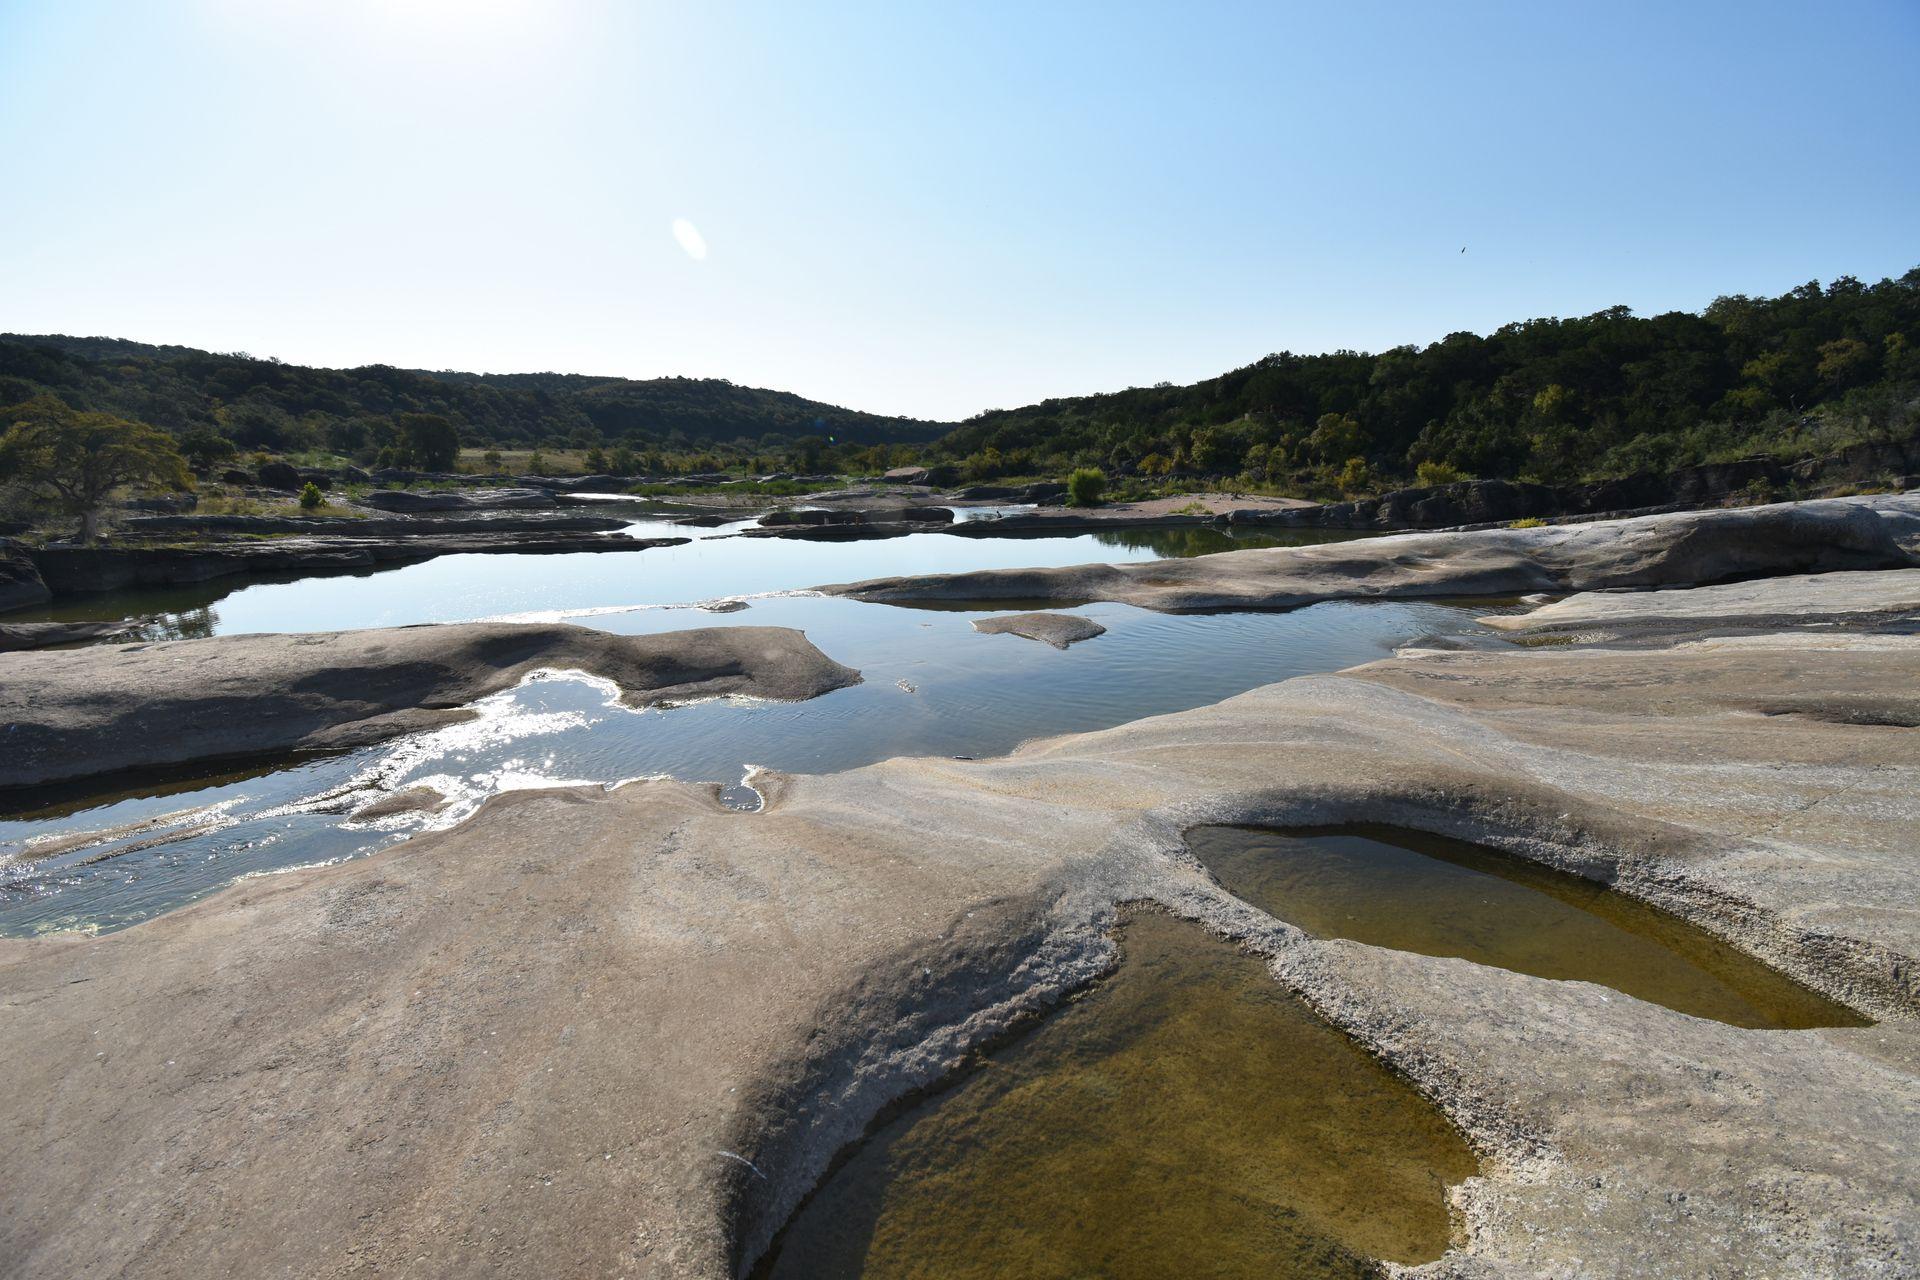 An area of rocks and water at Pedernales Falls. There are several pools of water within the rock faces.